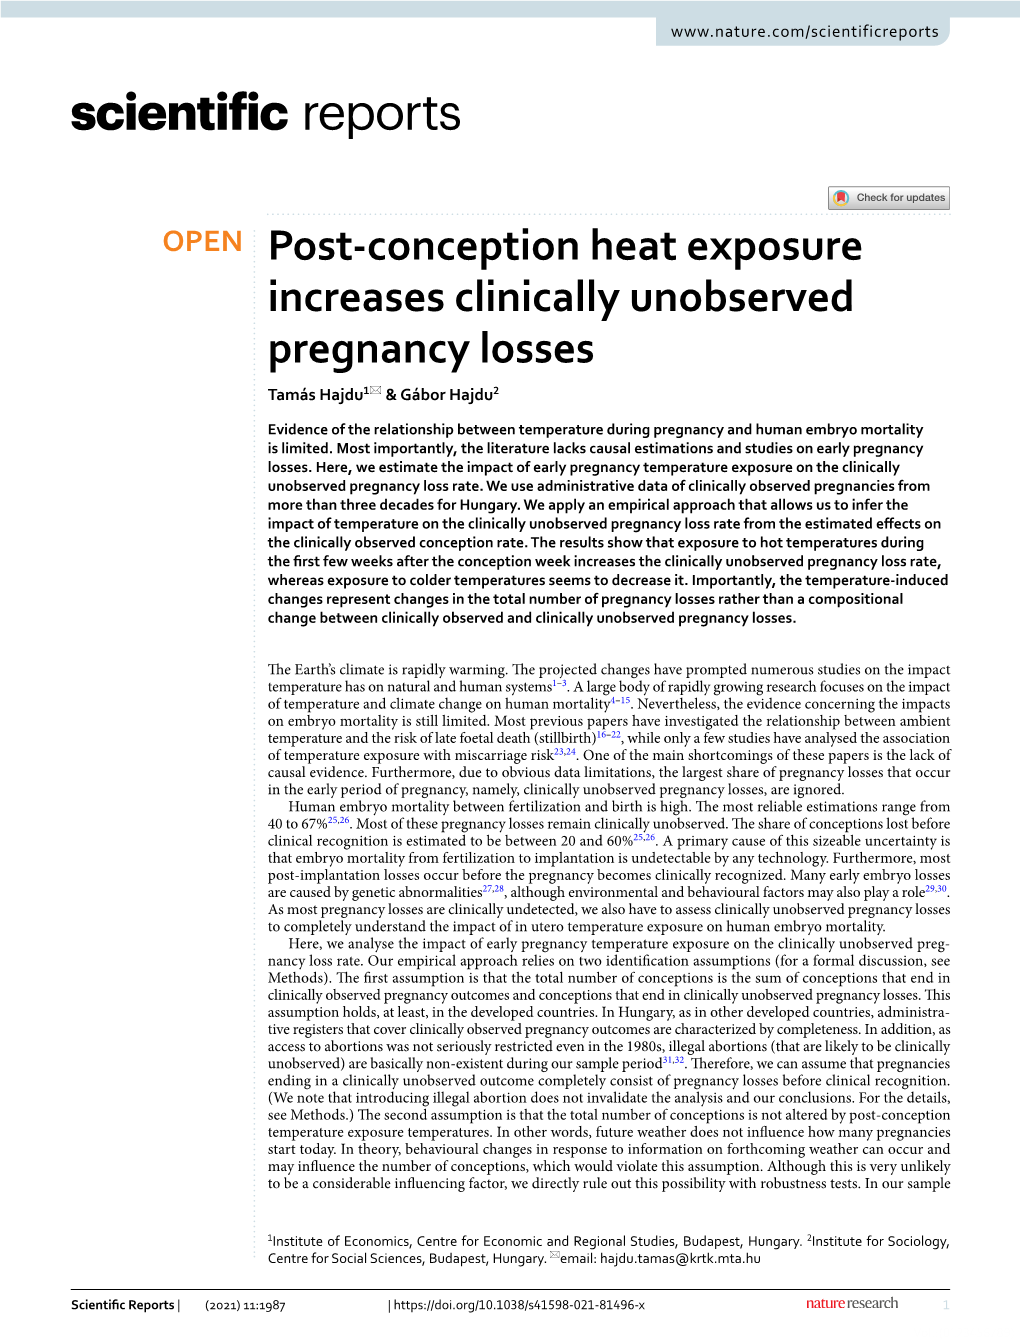 Post-Conception Heat Exposure Increases Clinically Unobserved